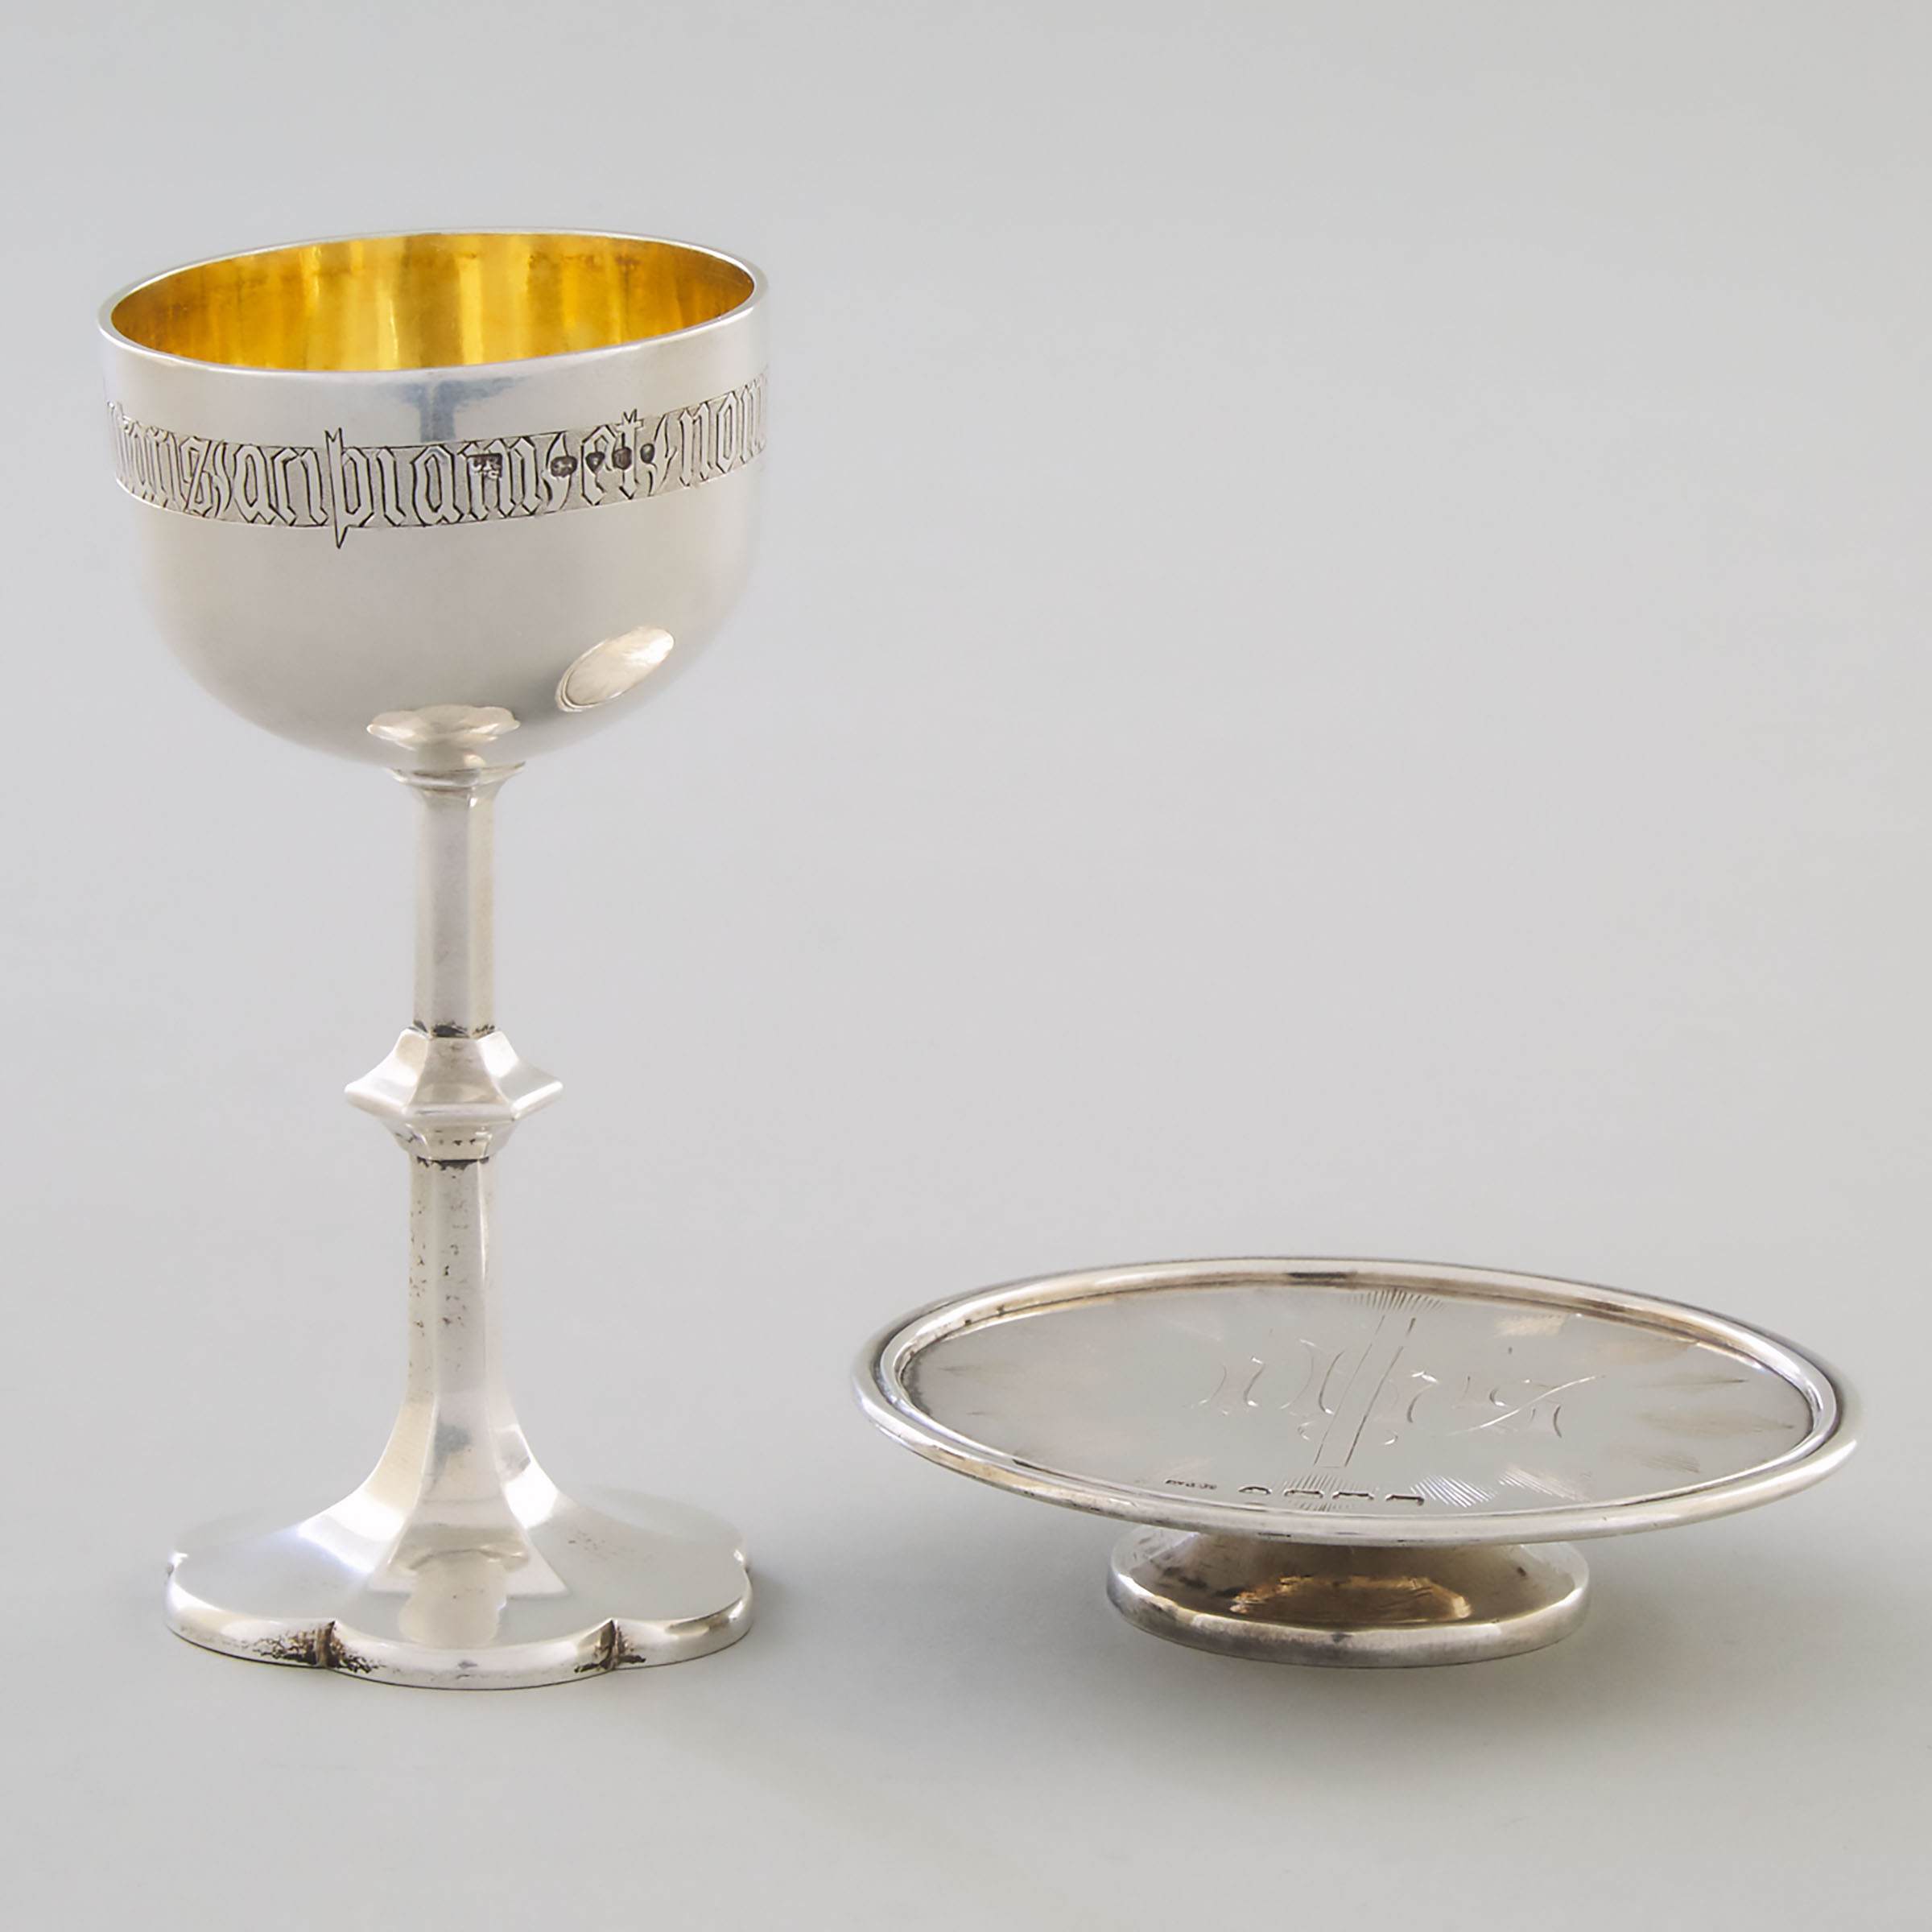 Victorian Silver Small Chalice and Standing Paten, Charles Rawlings & William Summers, London, 1854 and Josiah Williams & Co., Exeter, 1868